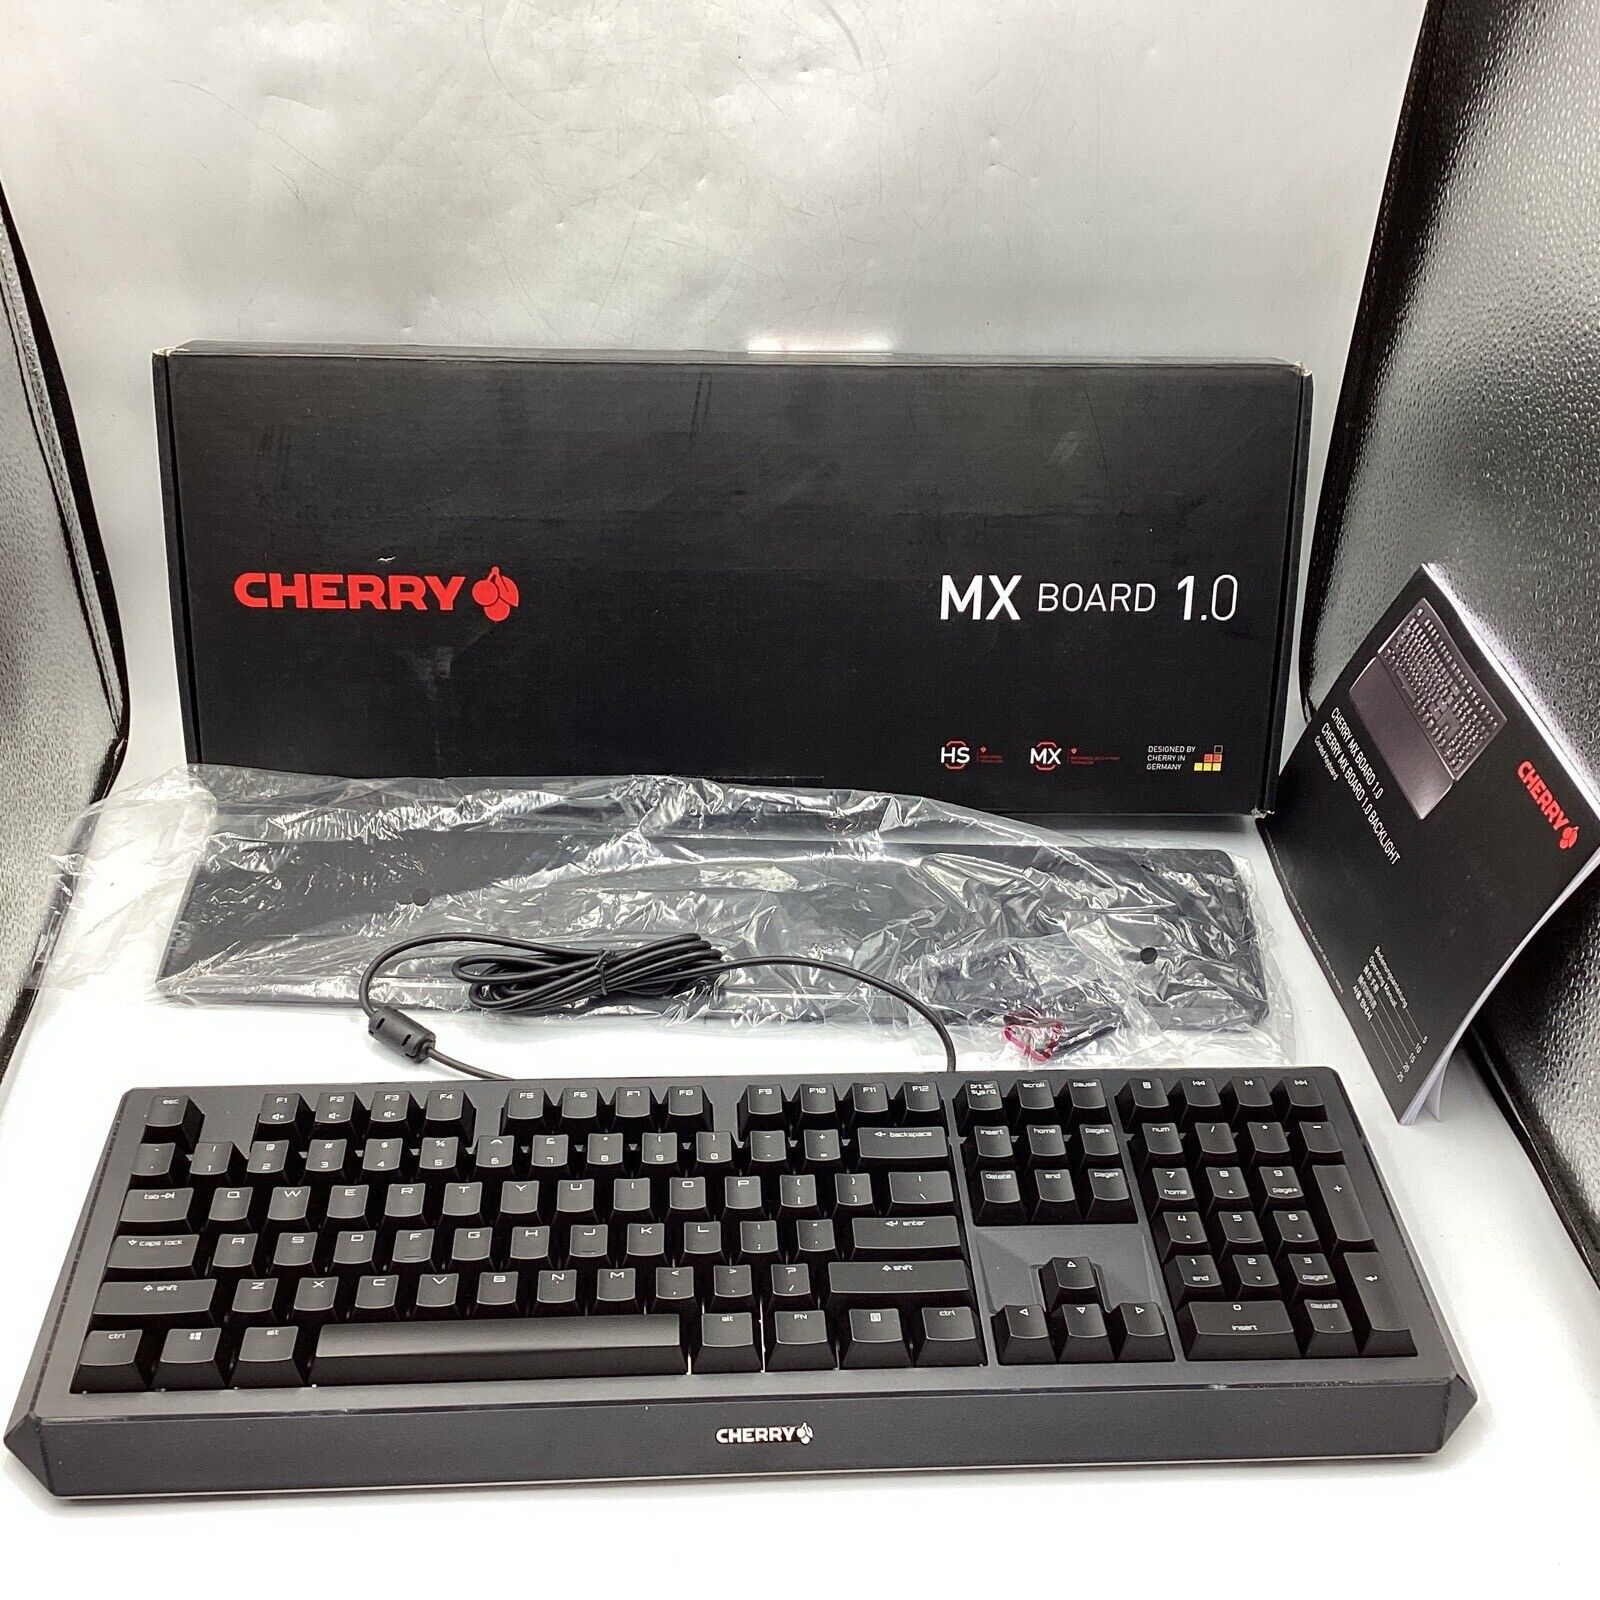 Cherry MX 1.0 Wired Mechanical Keyboard with Rest - OPENED BOX